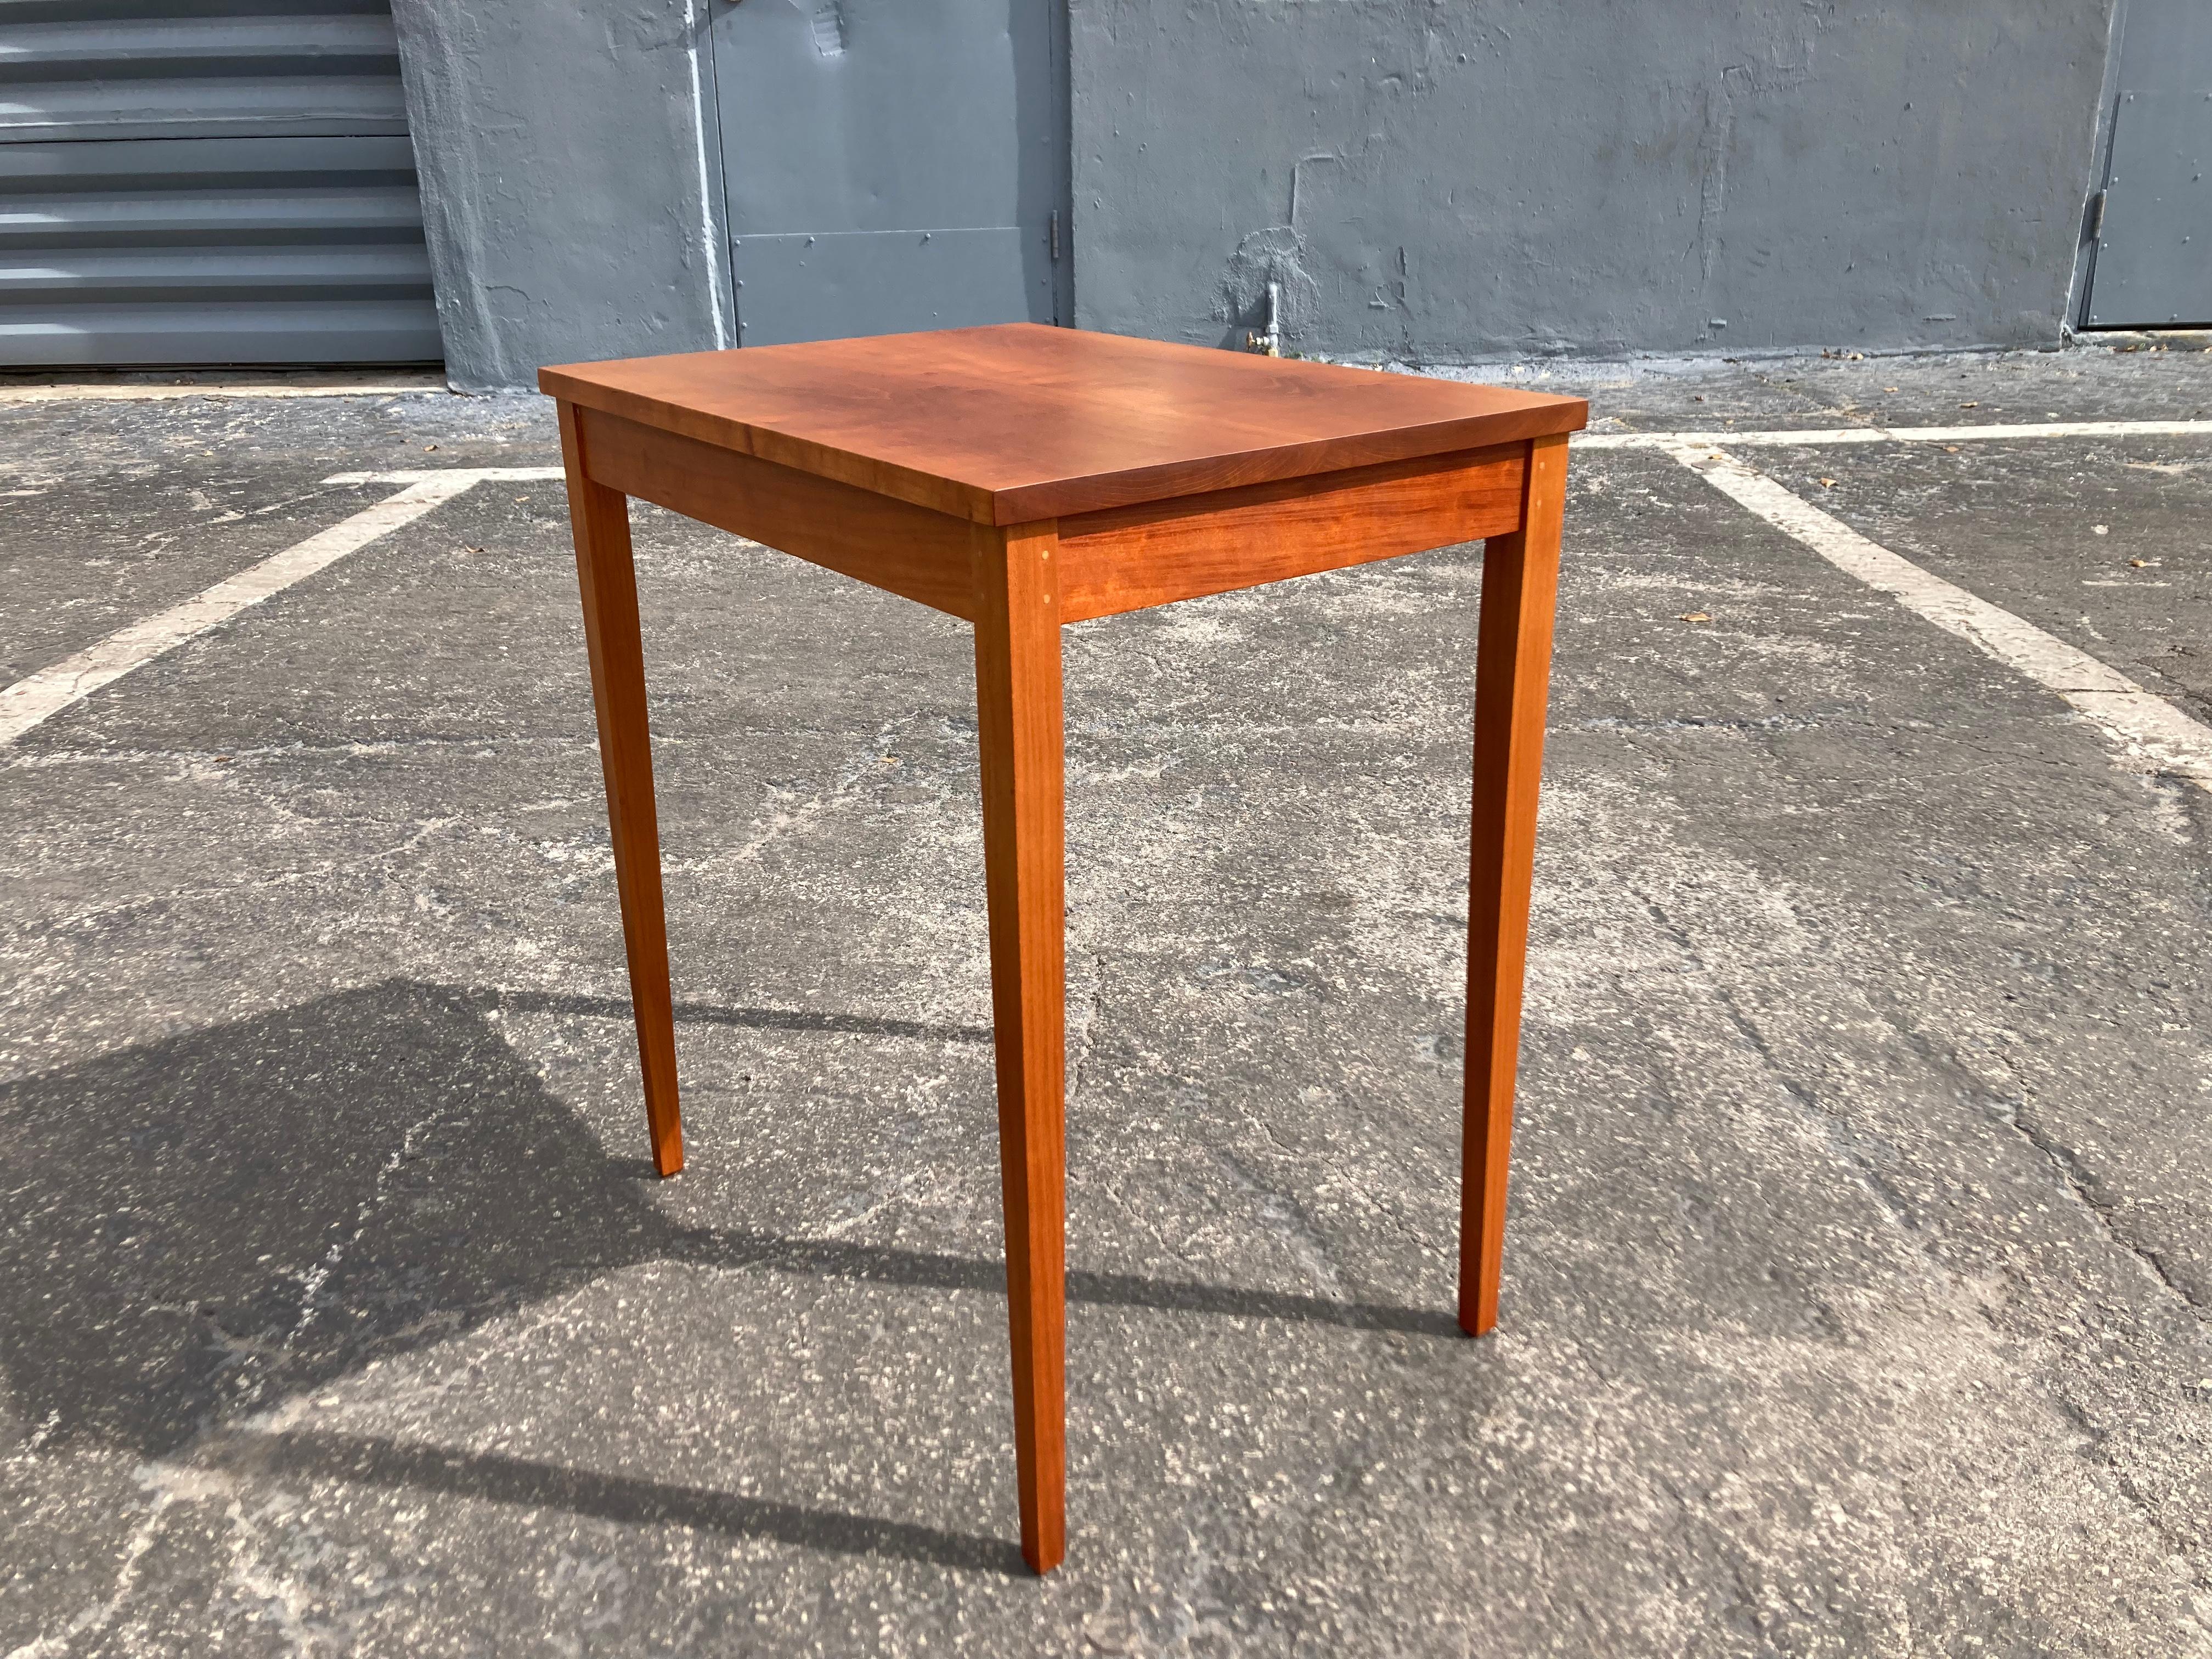 Handmade Moser Side Table from 2015 in Cherry. In good condition with some normal wear. Please see our other listings for more Moser furniture.